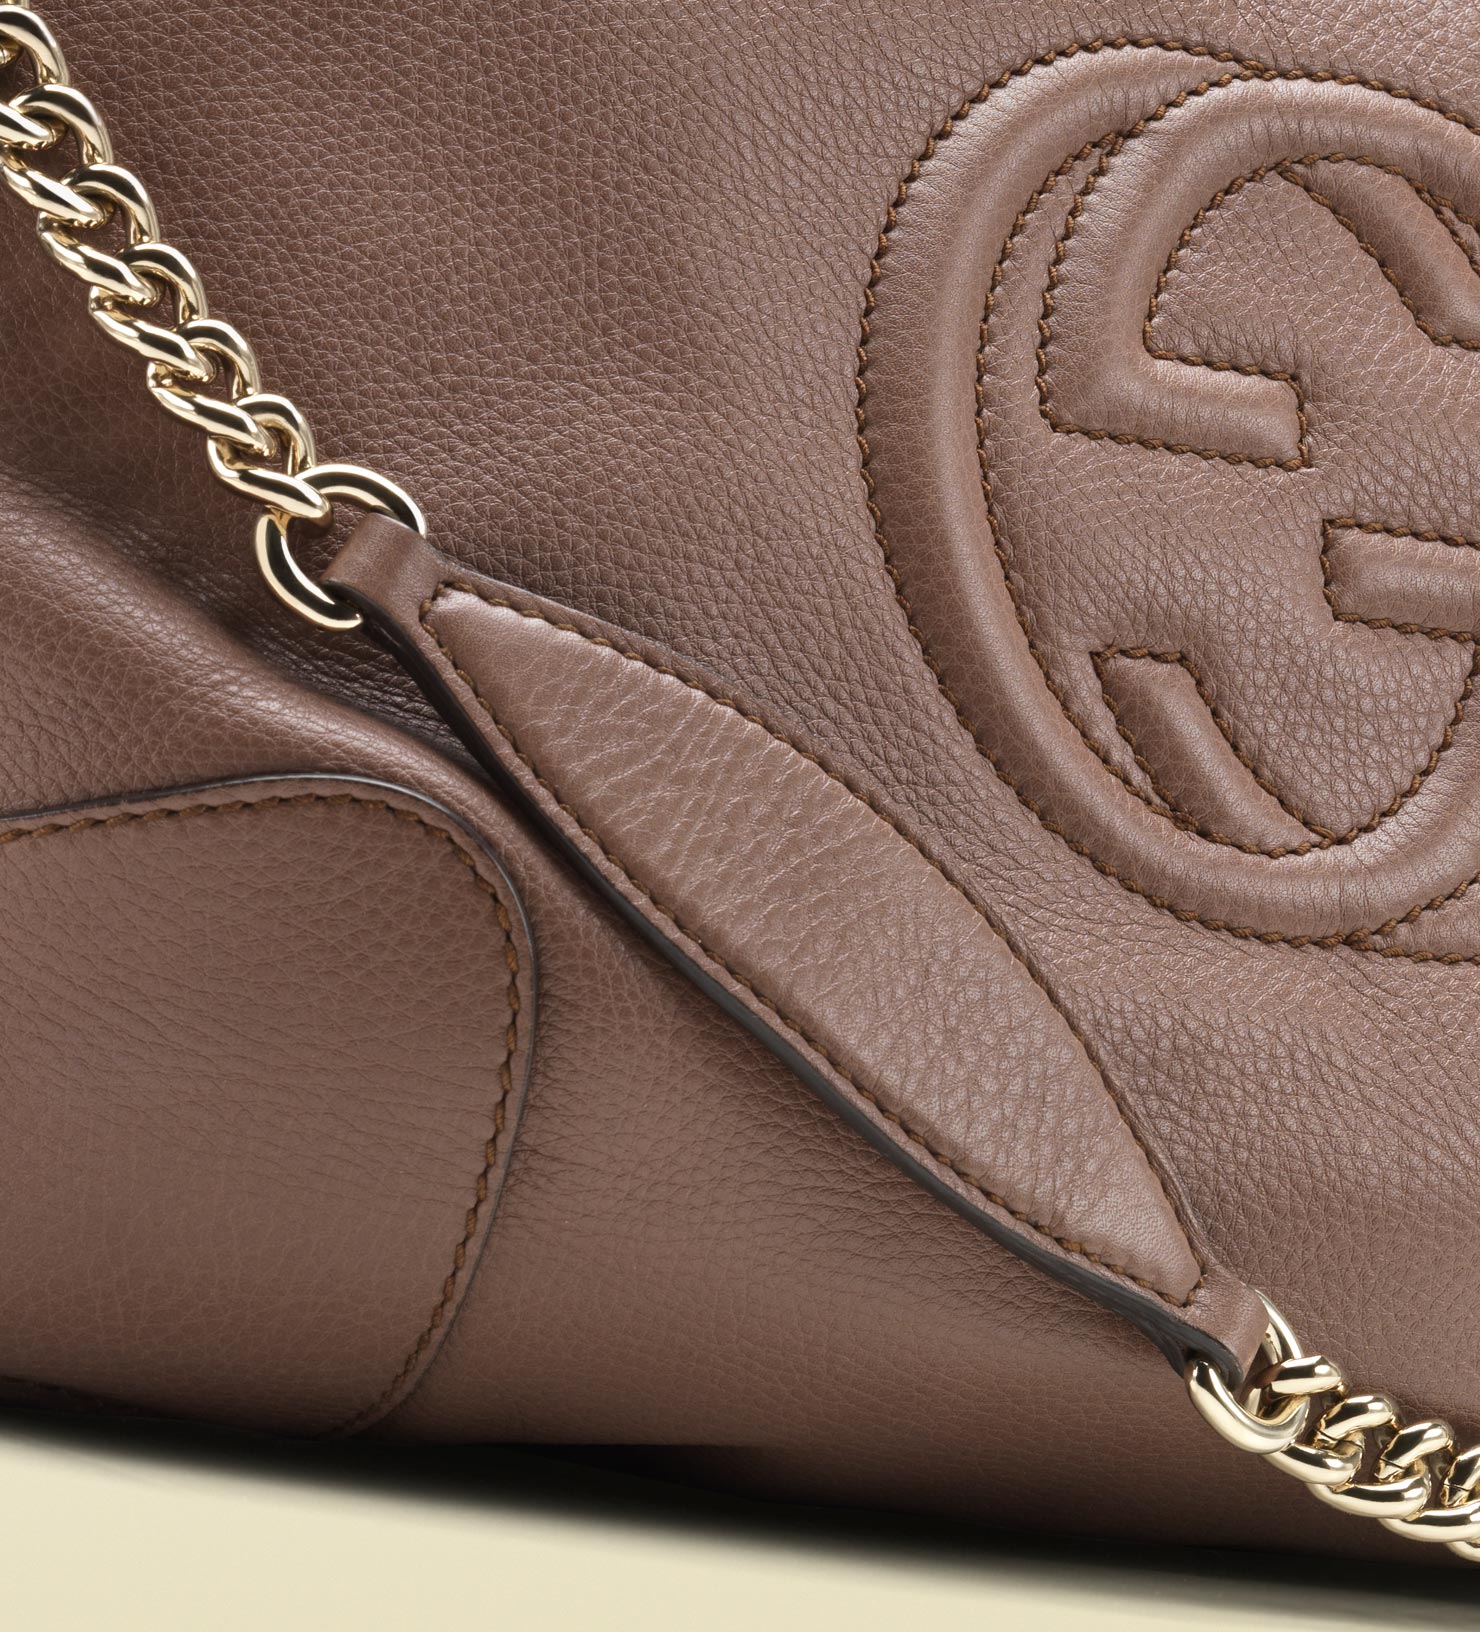 Gucci Soho Pink Tan Leather Shoulder Bag with Chain Strap - Lyst